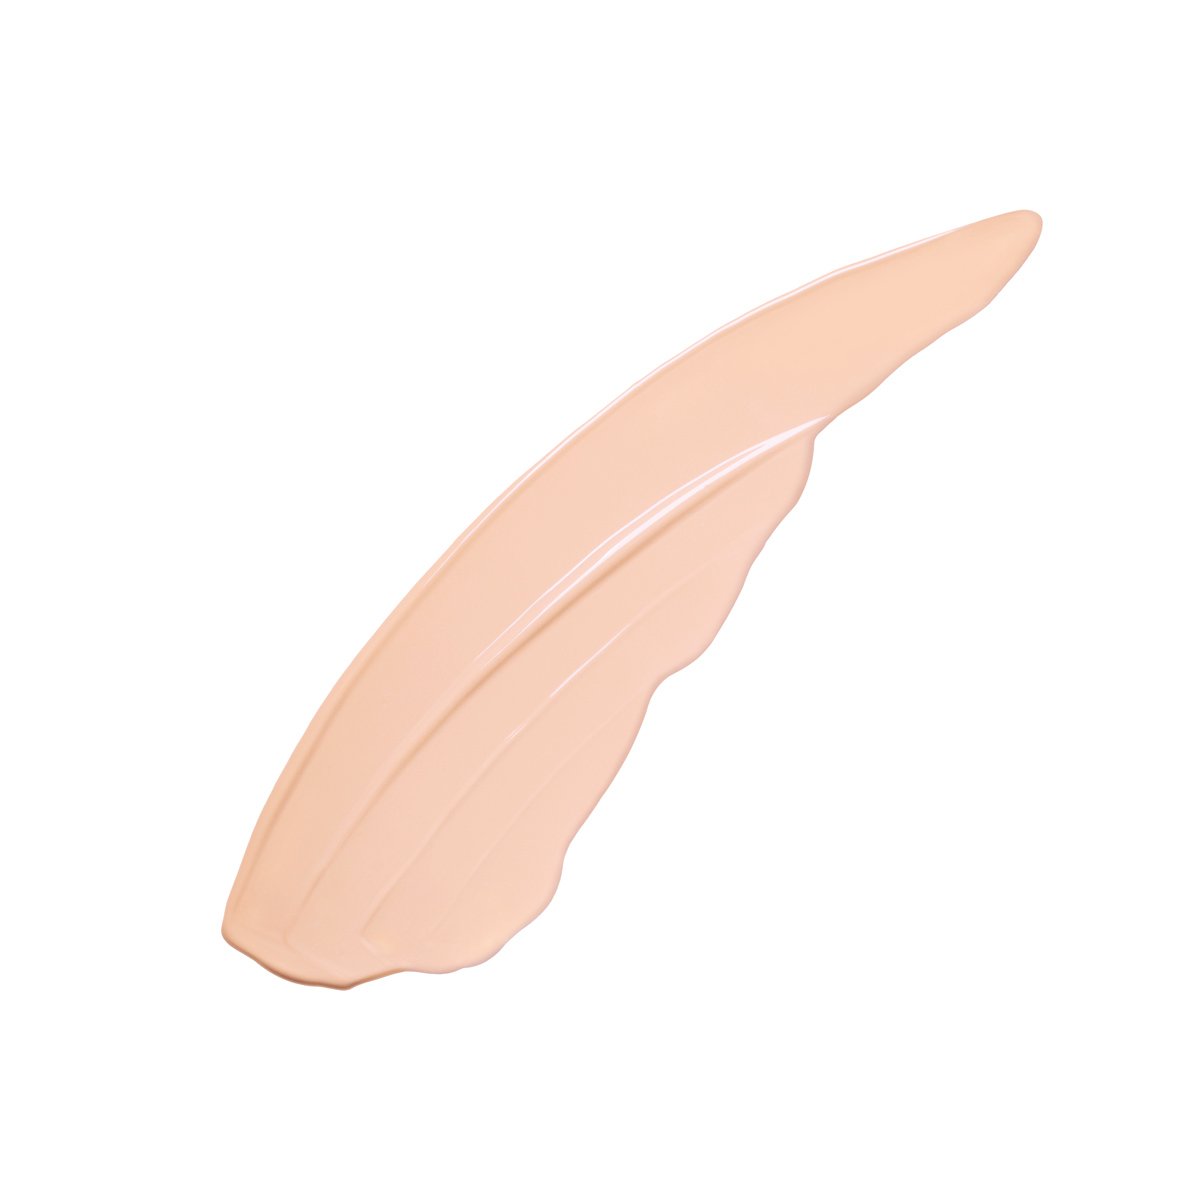 MCOBEAUTY Instant Camouflage & Contour Concealer - Ivory